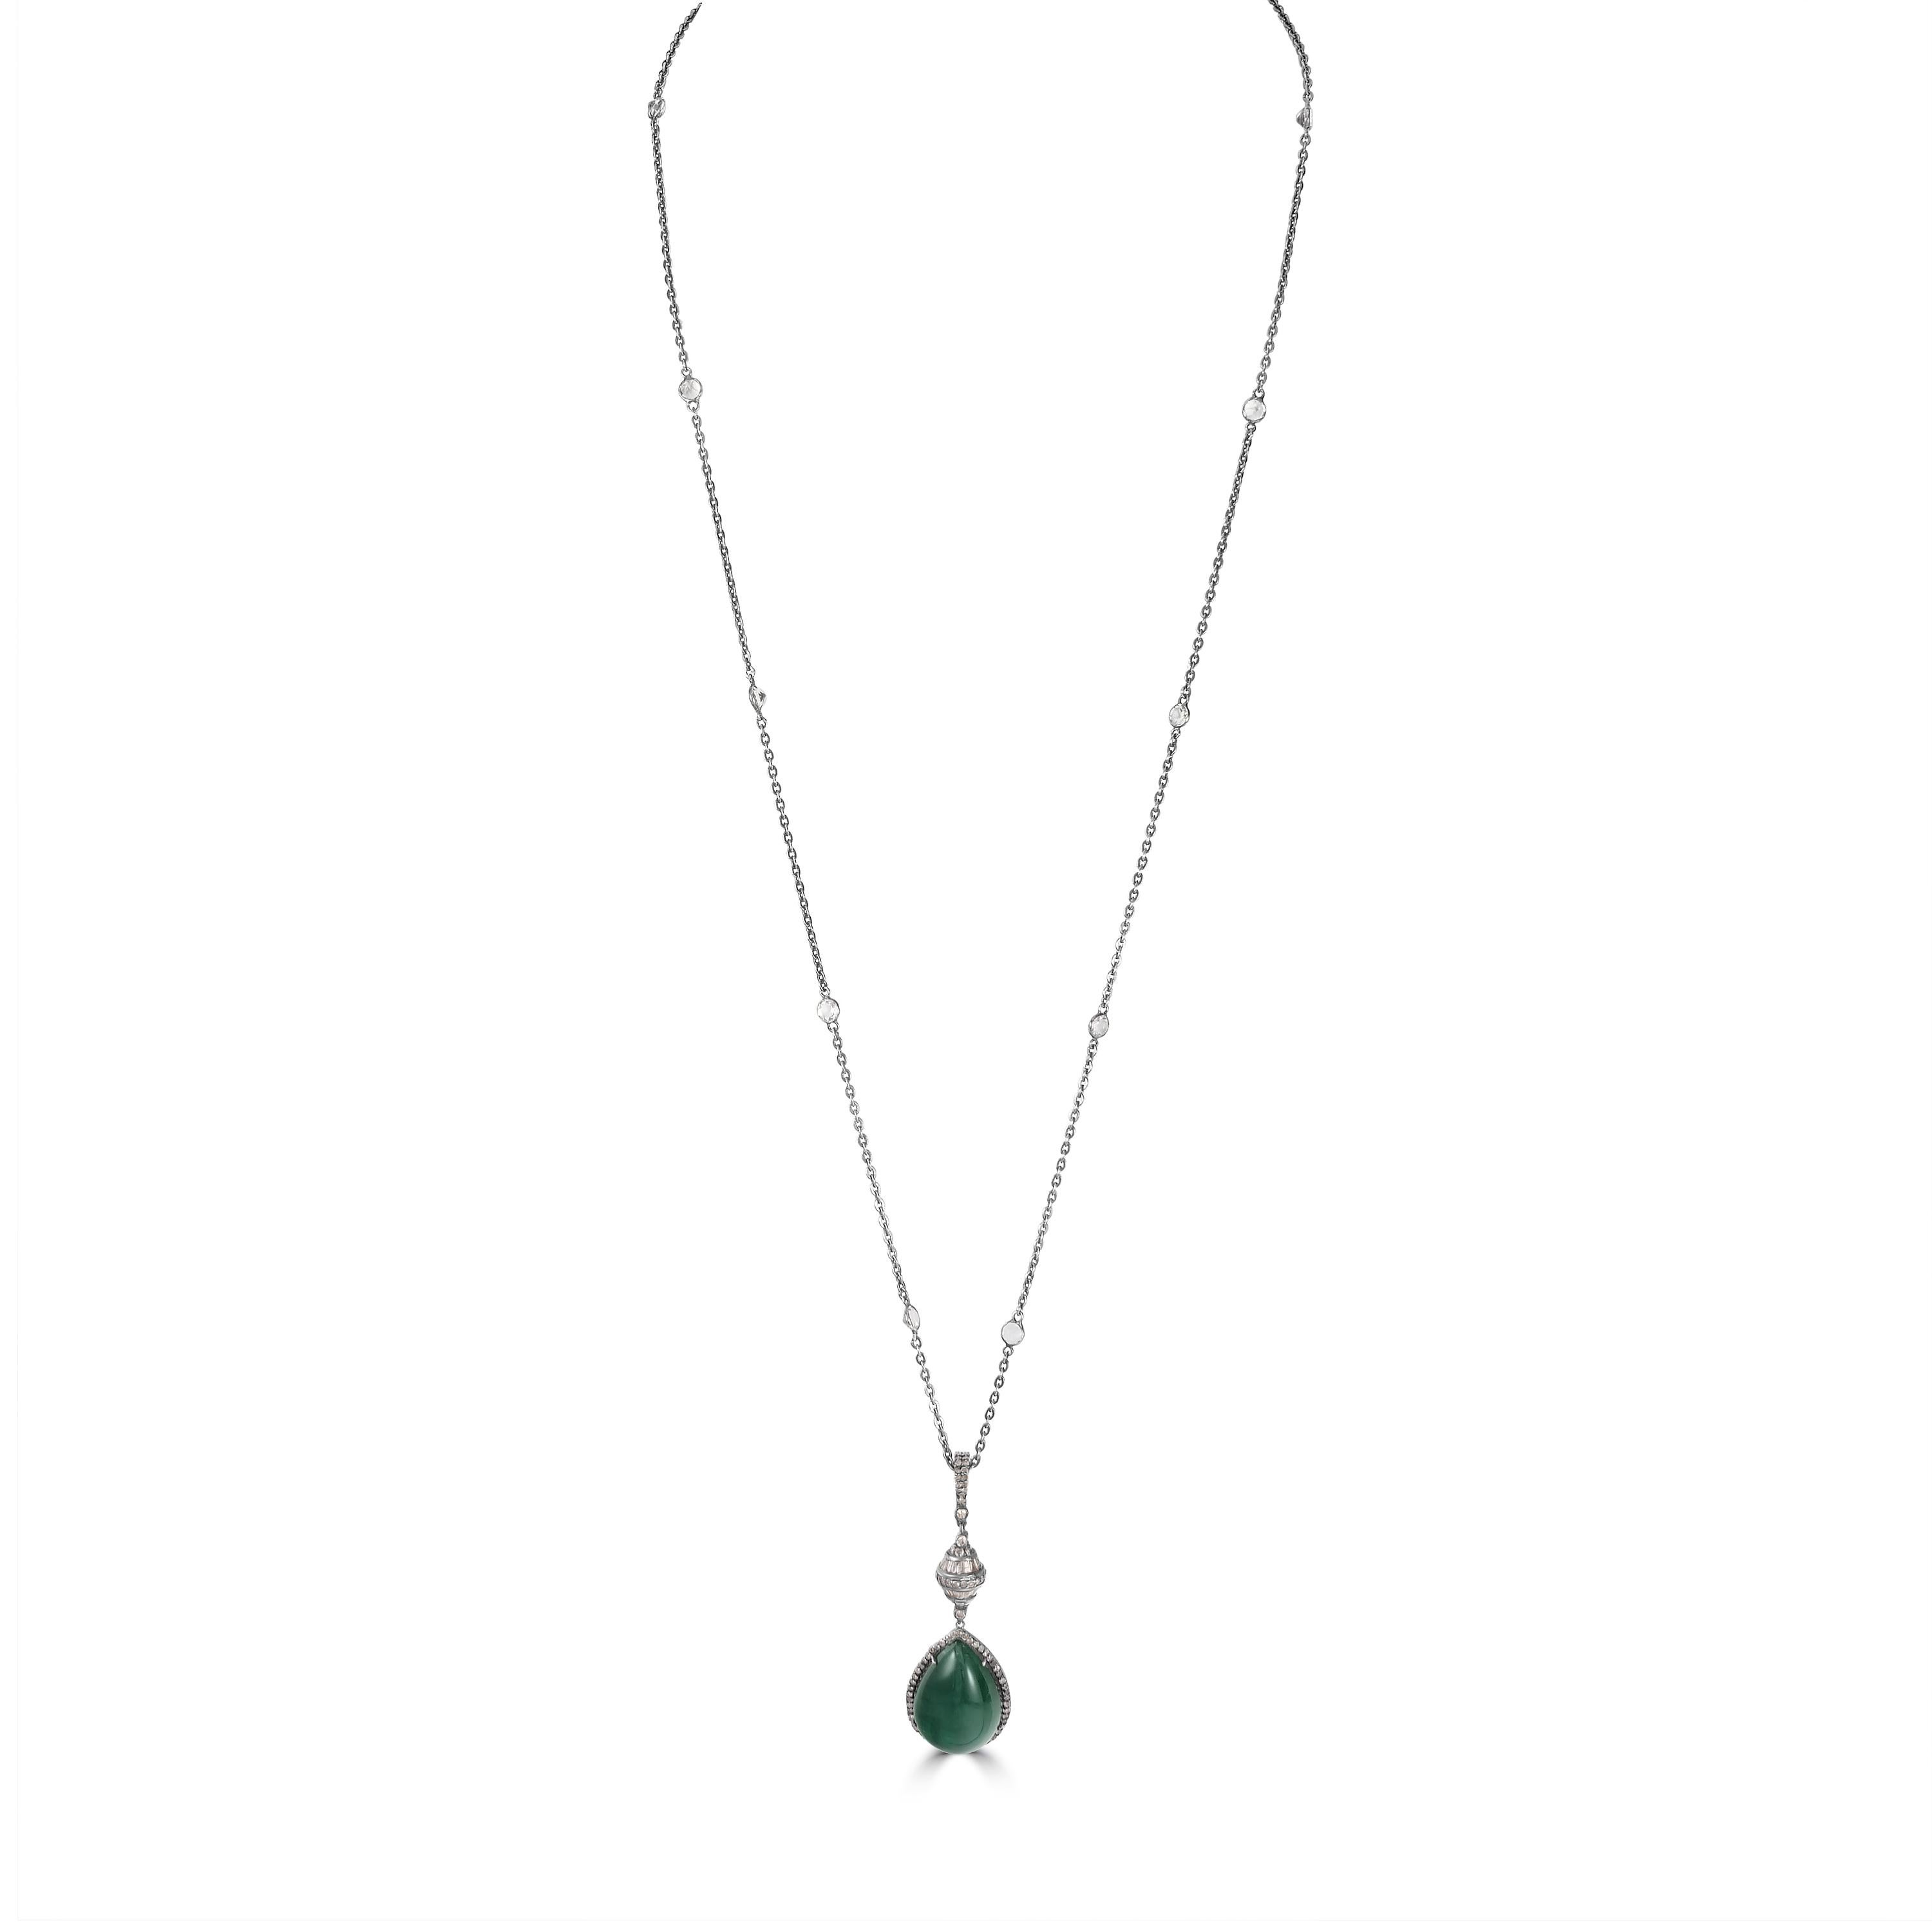 Introducing our exquisite Victorian 25 Cttw. Emerald, Diamond, and Topaz Pendant Necklace, a timeless piece that exudes elegance and sophistication.

This stunning Victorian pendant necklace features a 40-inch cable chain crafted from sterling